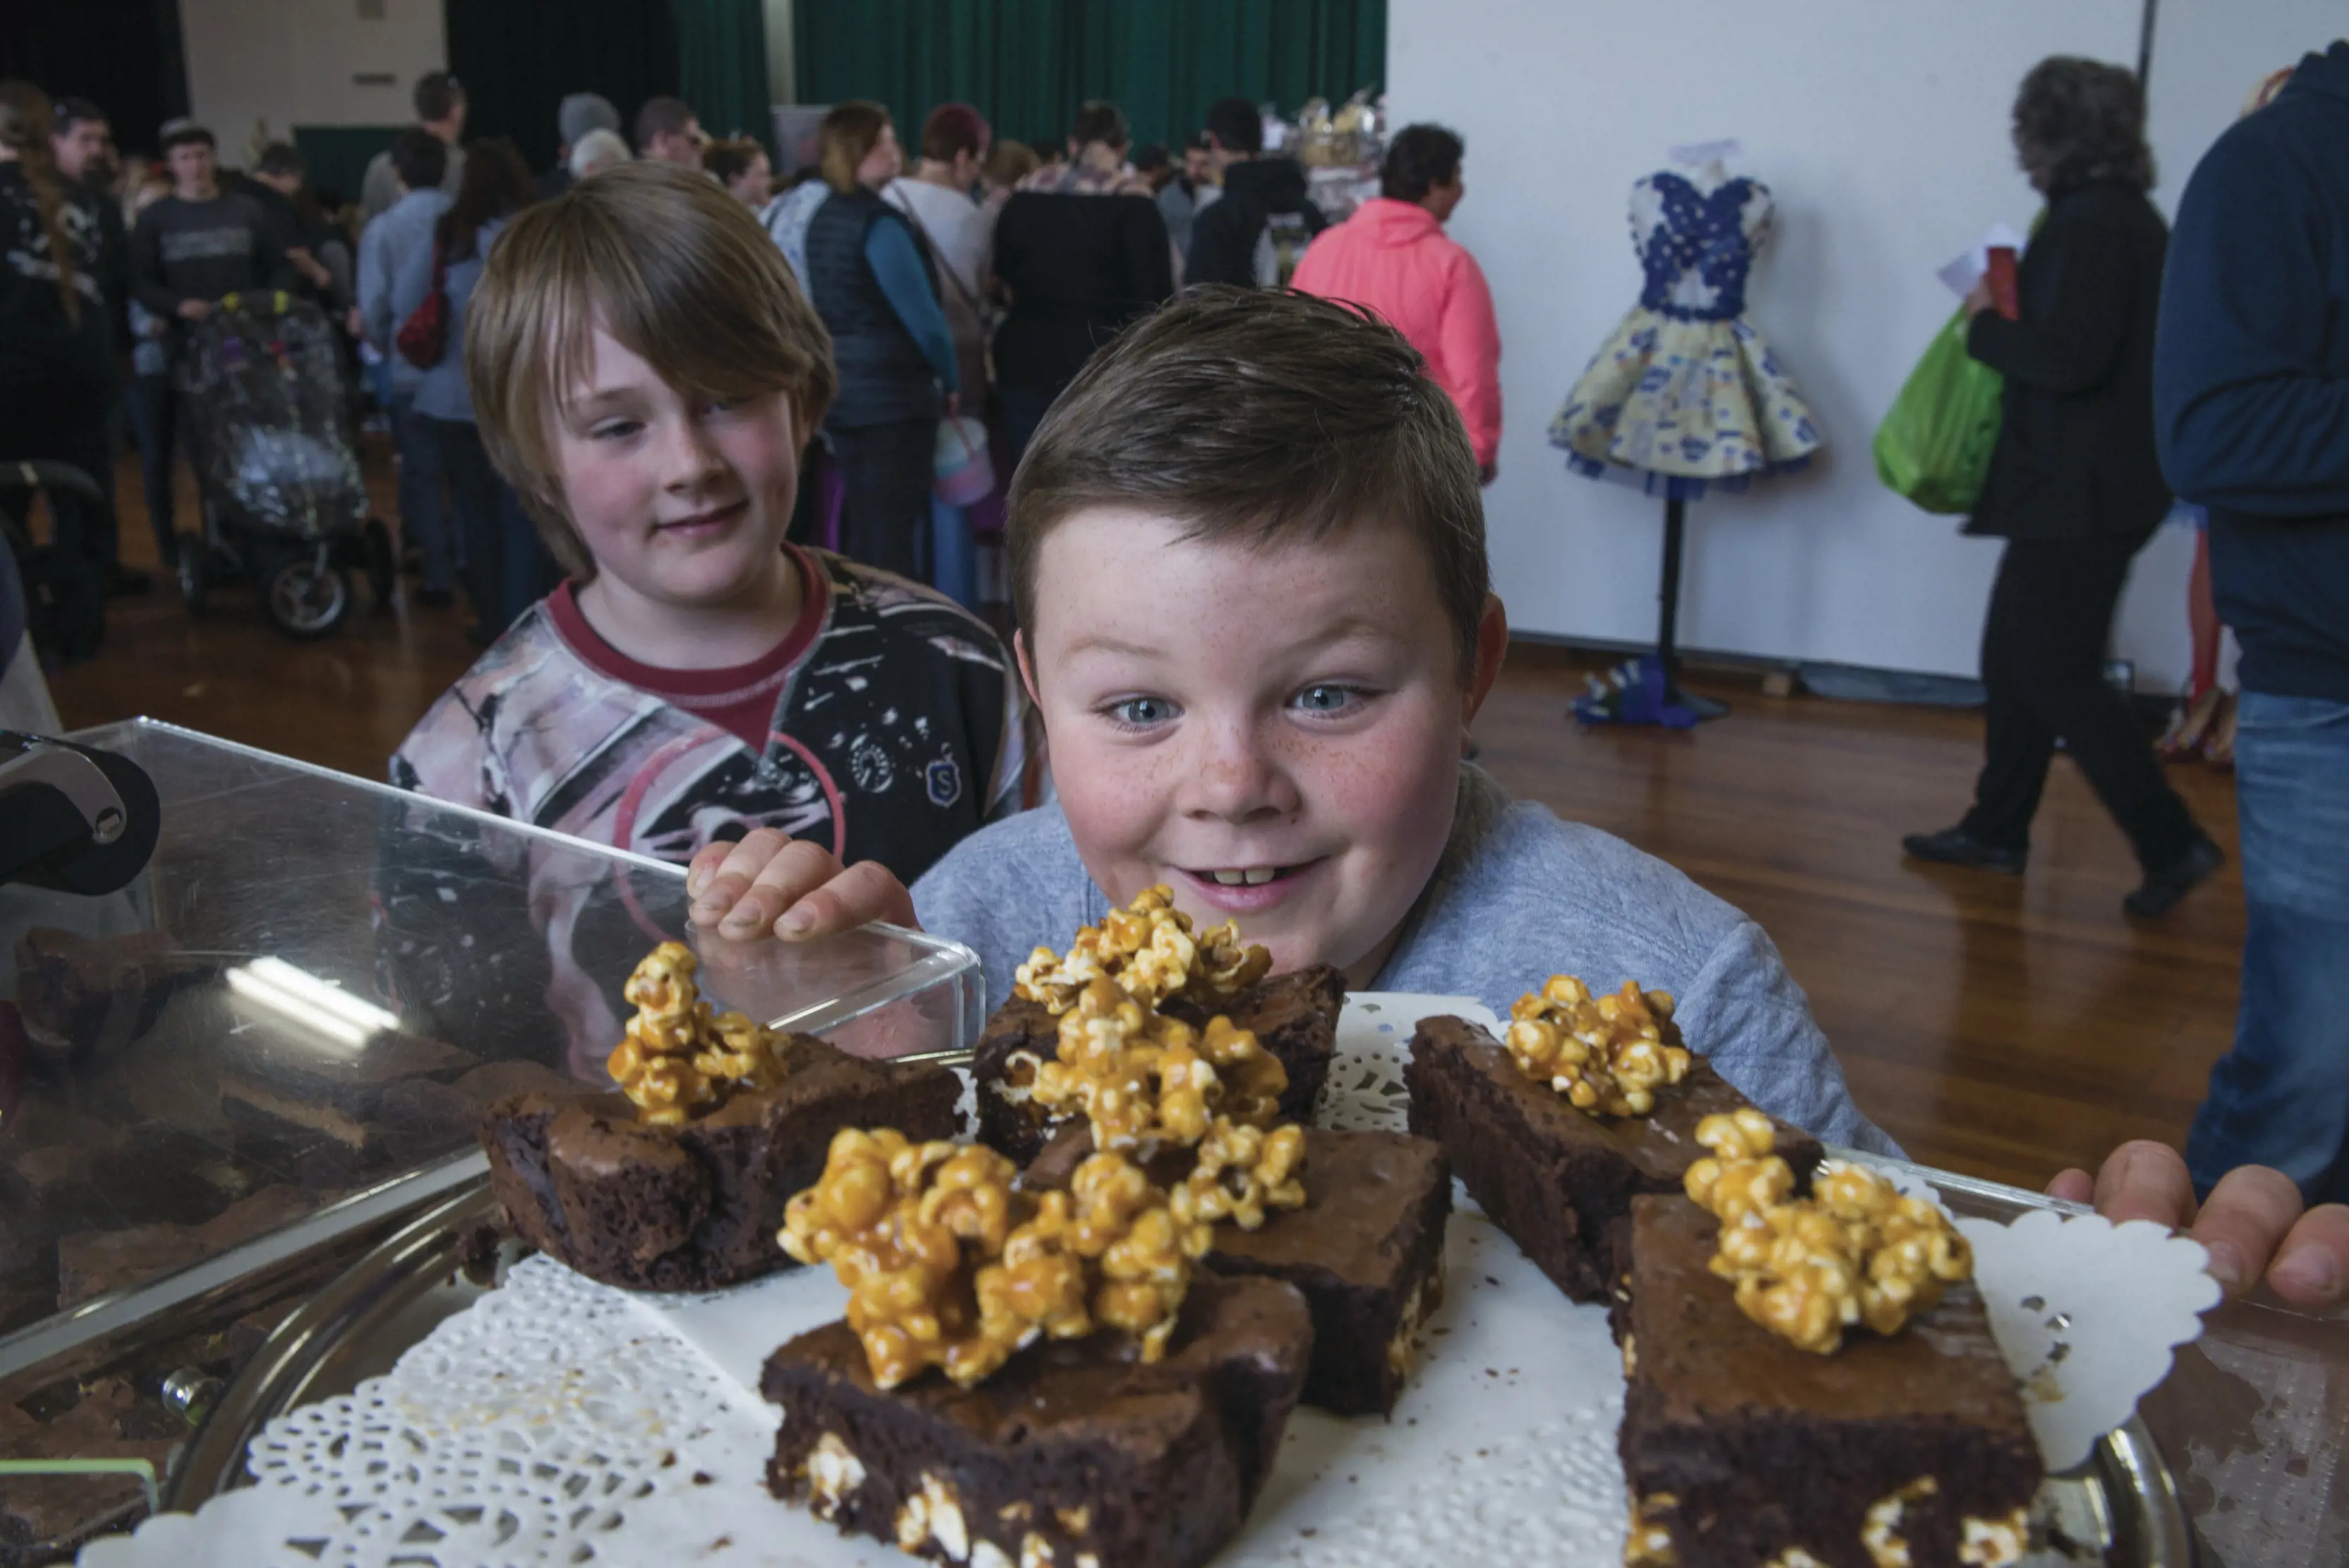 Close up image of a small boy and his friend, mouthwatering over chocolate at the Chocolate Winterfest.